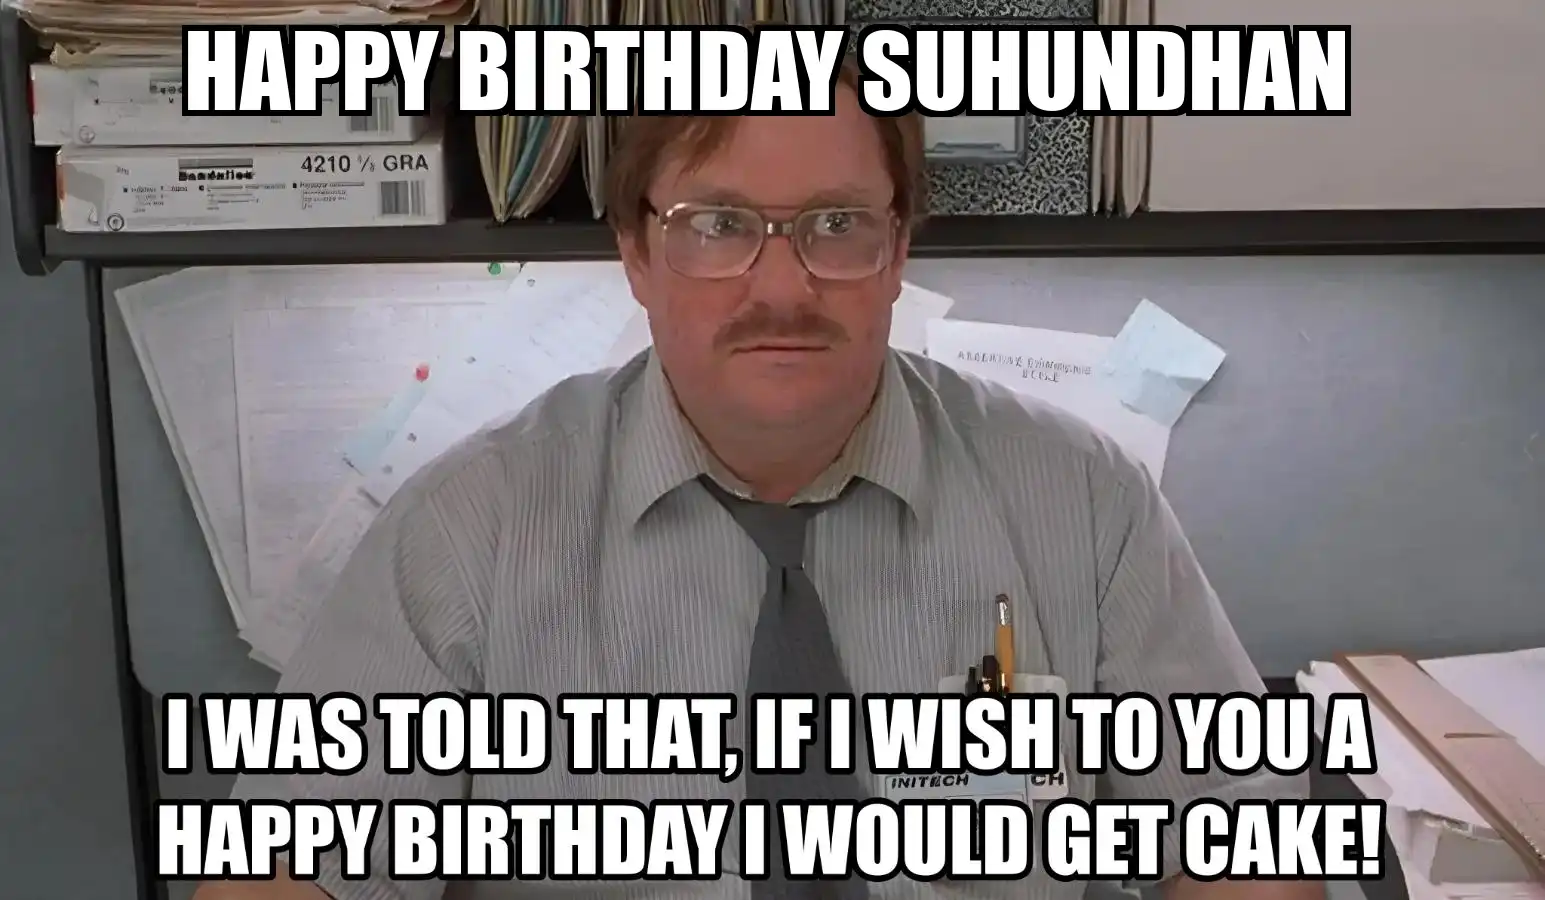 Happy Birthday Suhundhan I Would Get A Cake Meme